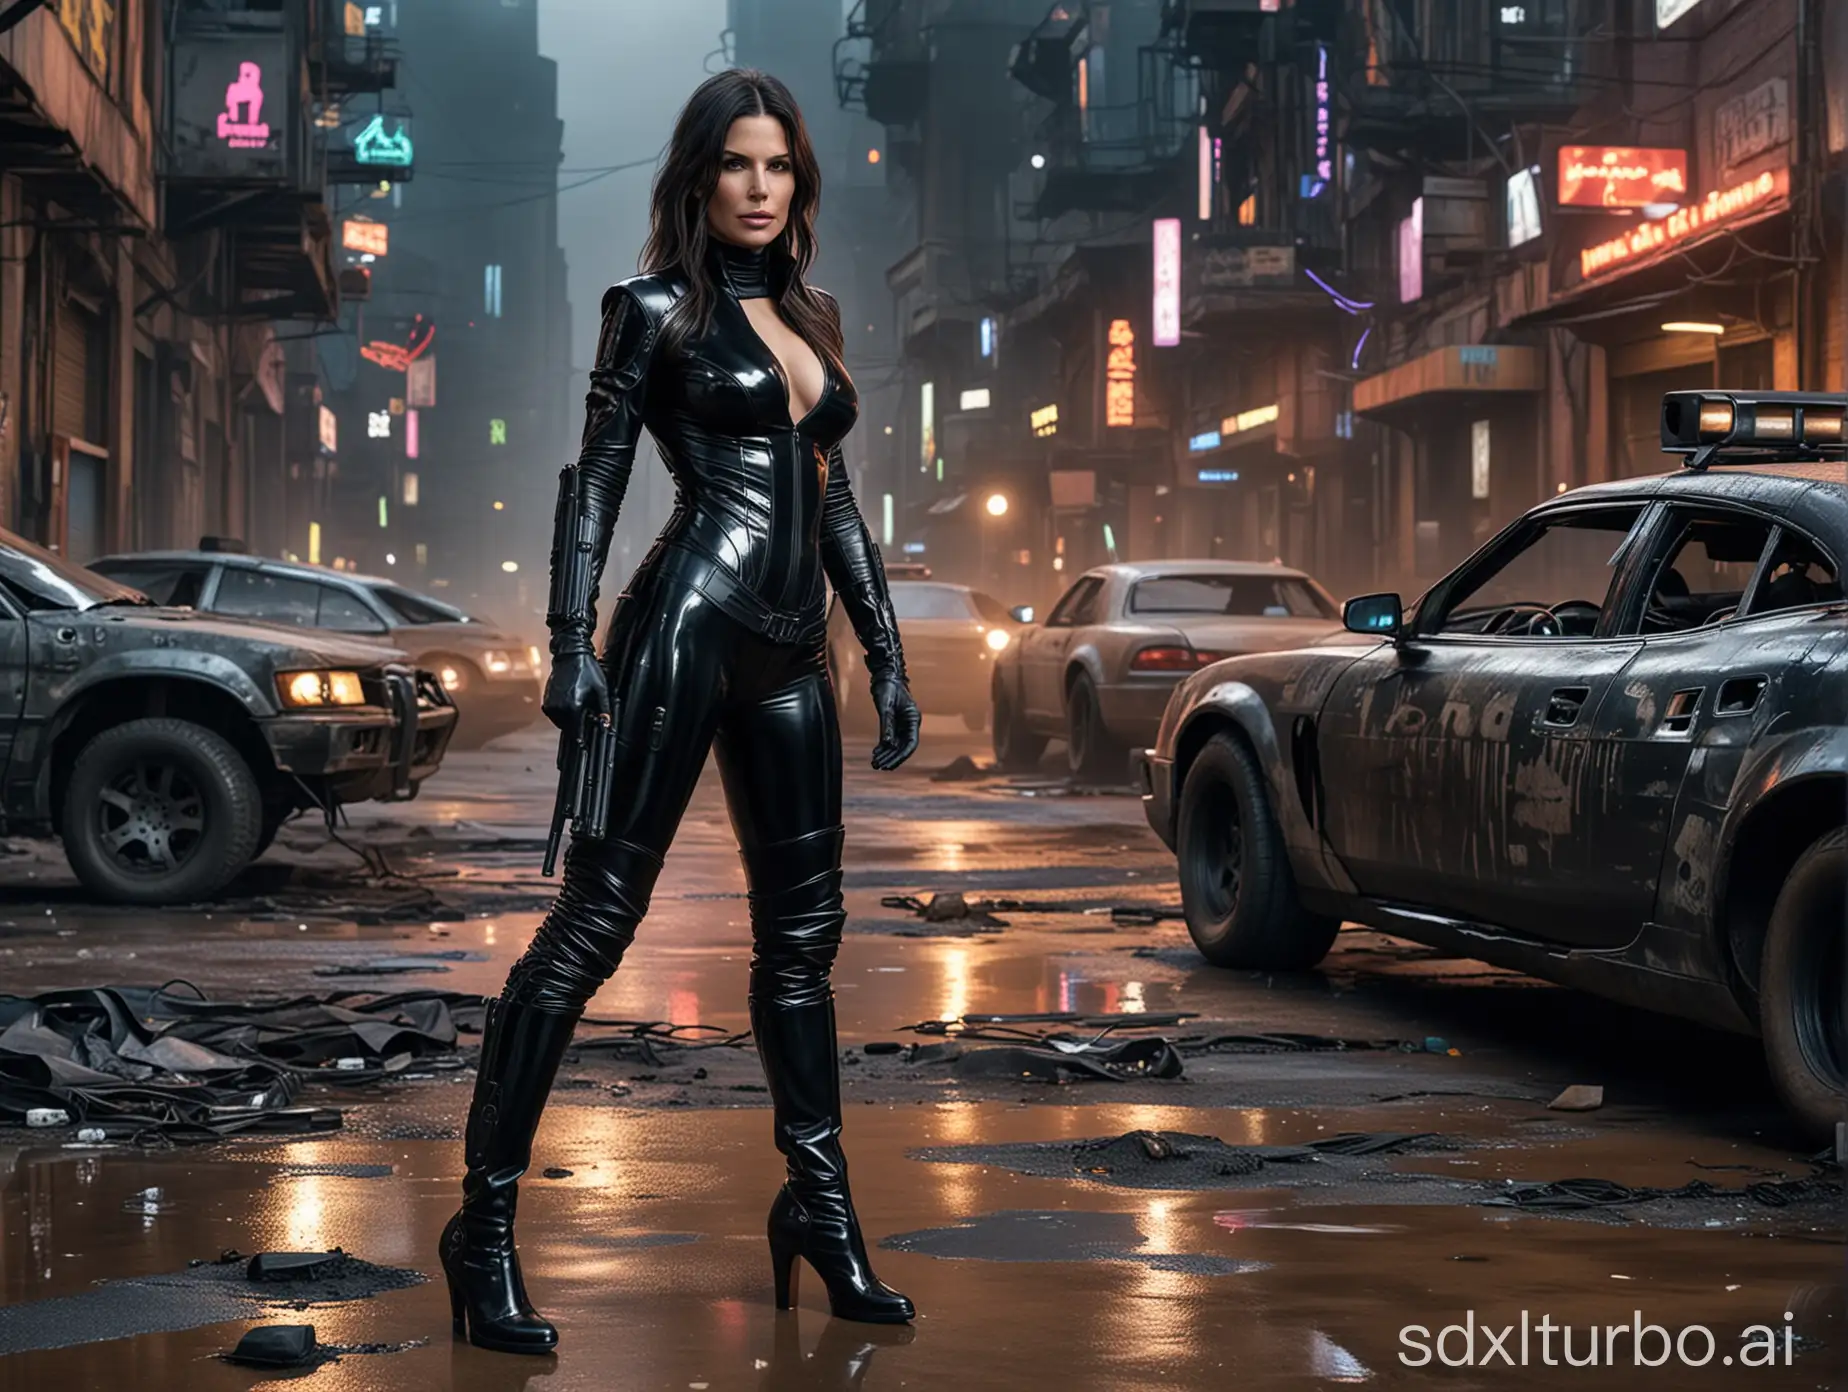 Cyberpunk-Police-Sandra-Bullock-in-Shinny-PVC-Catsuit-and-ThighHigh-Boots-Amidst-Neons